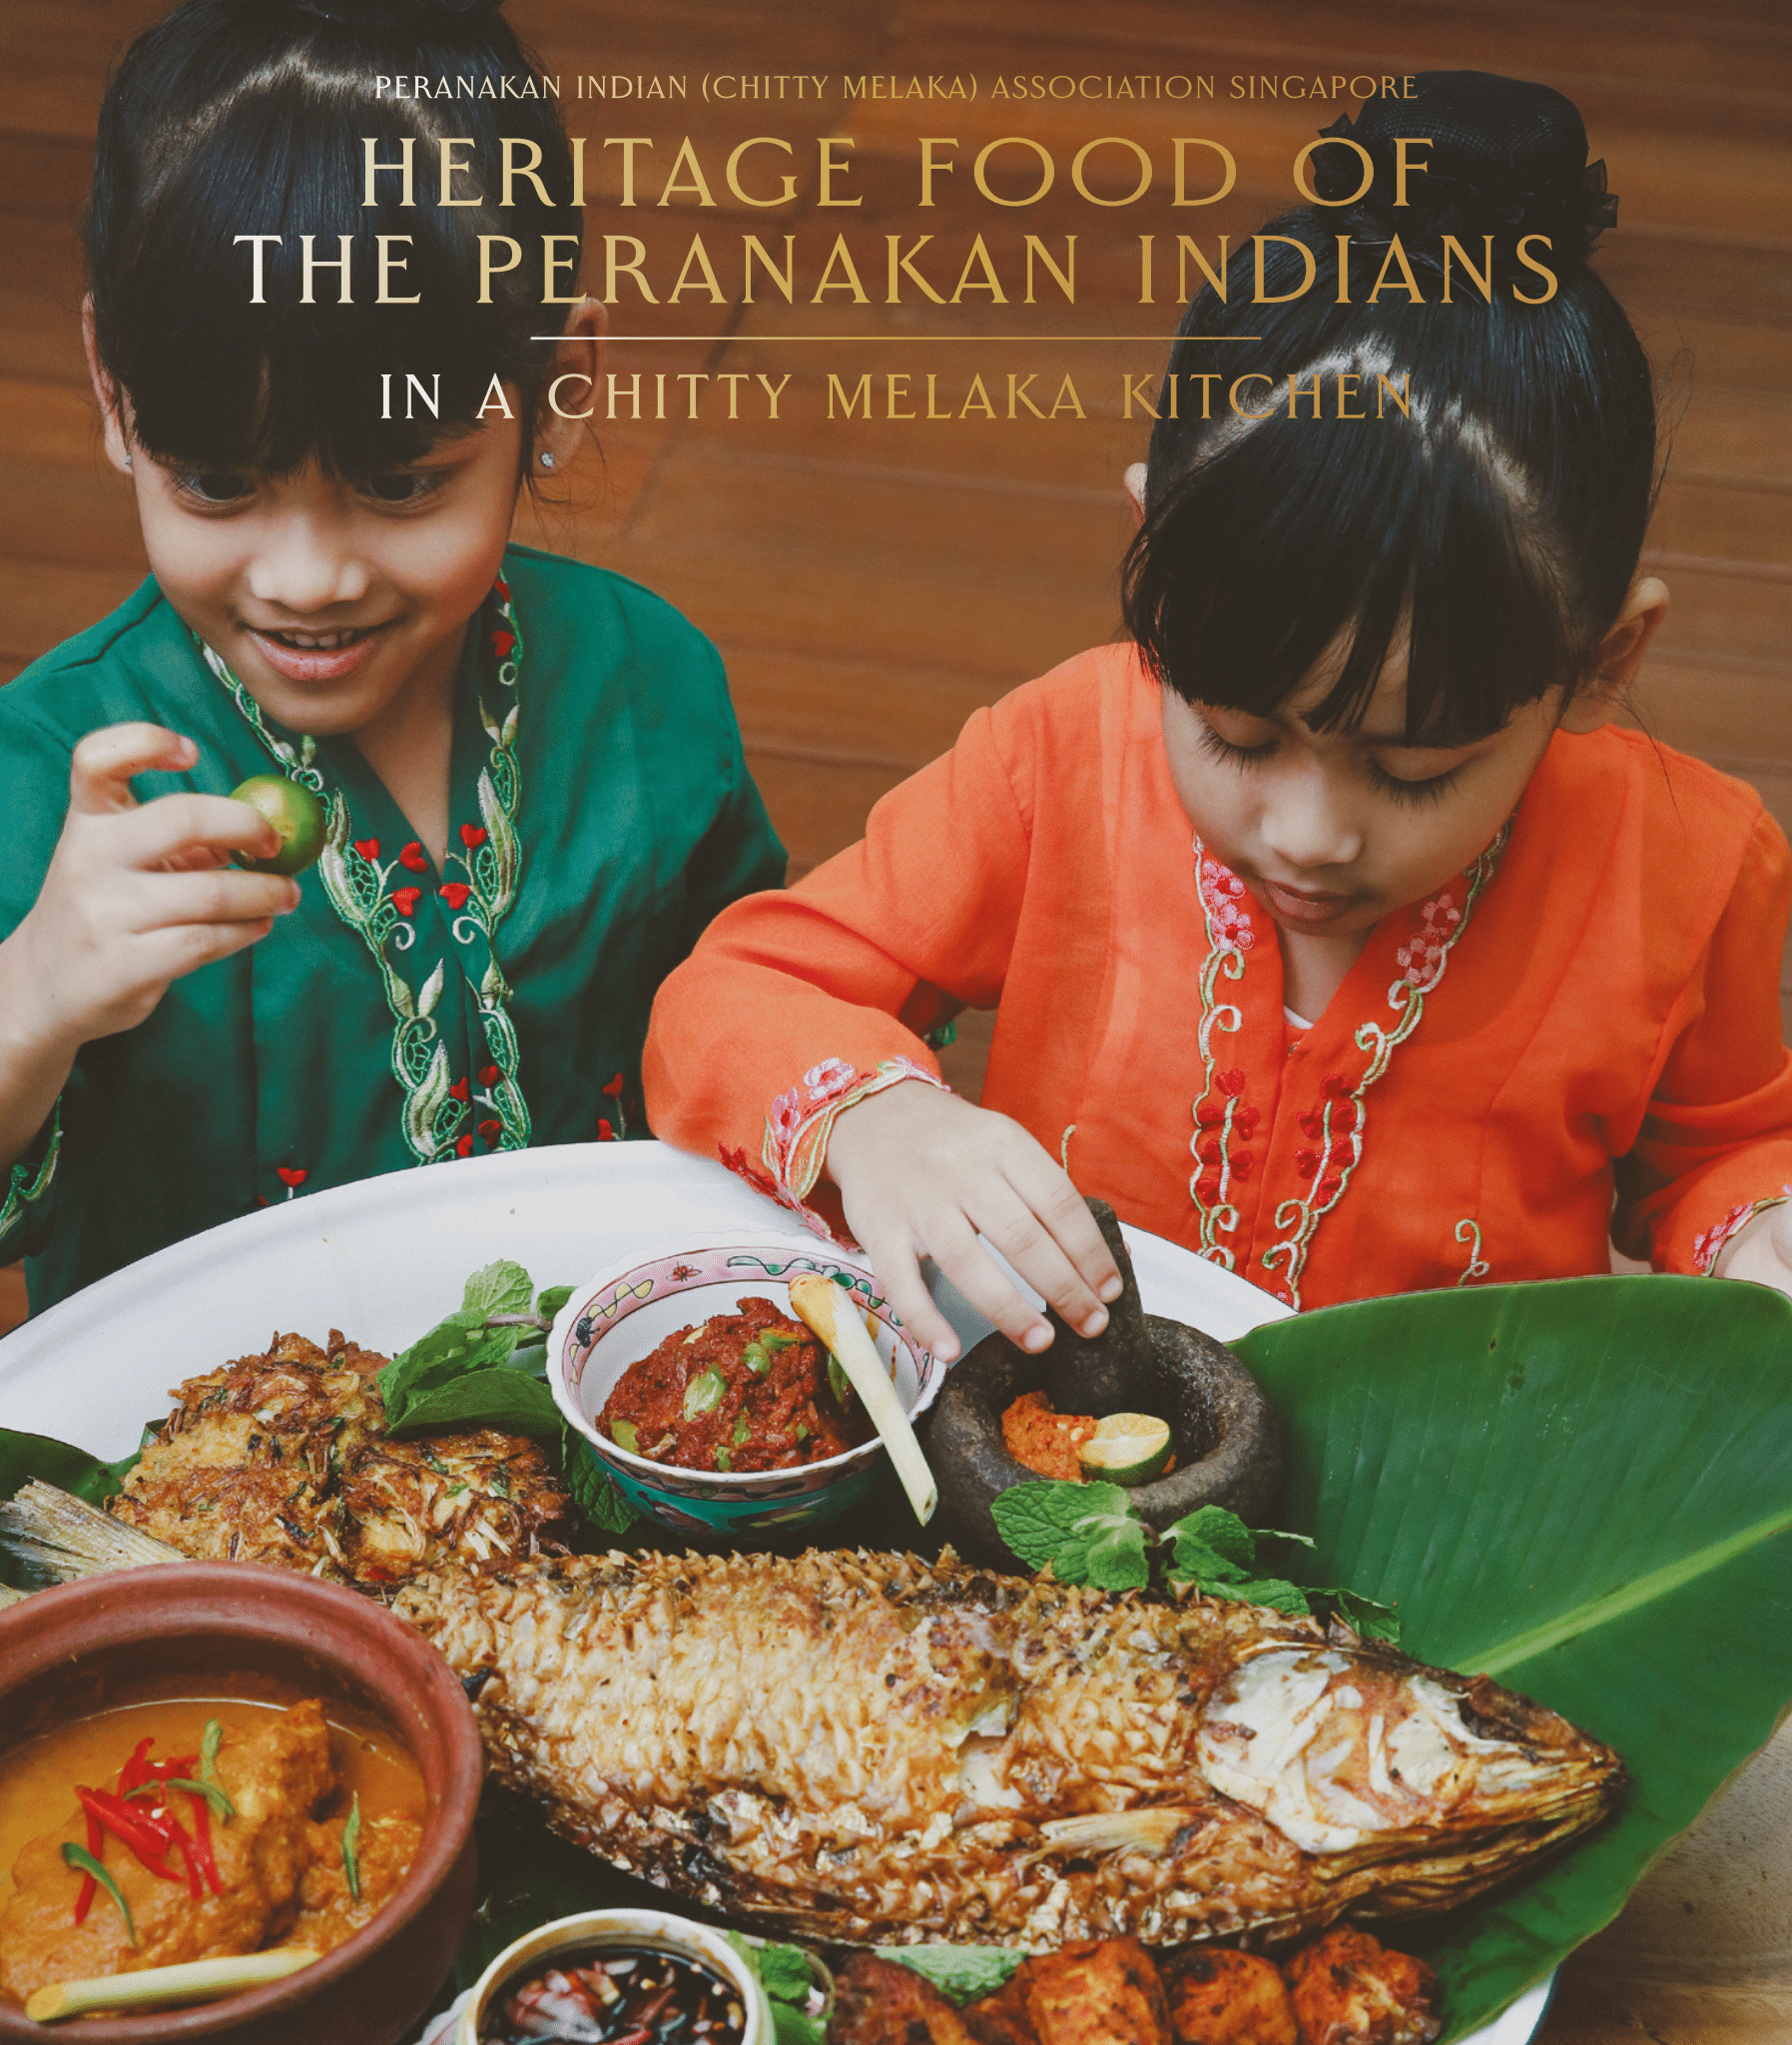 Heritage Food of the Peranakan Indians: In a Chitty Melaka Kitchen